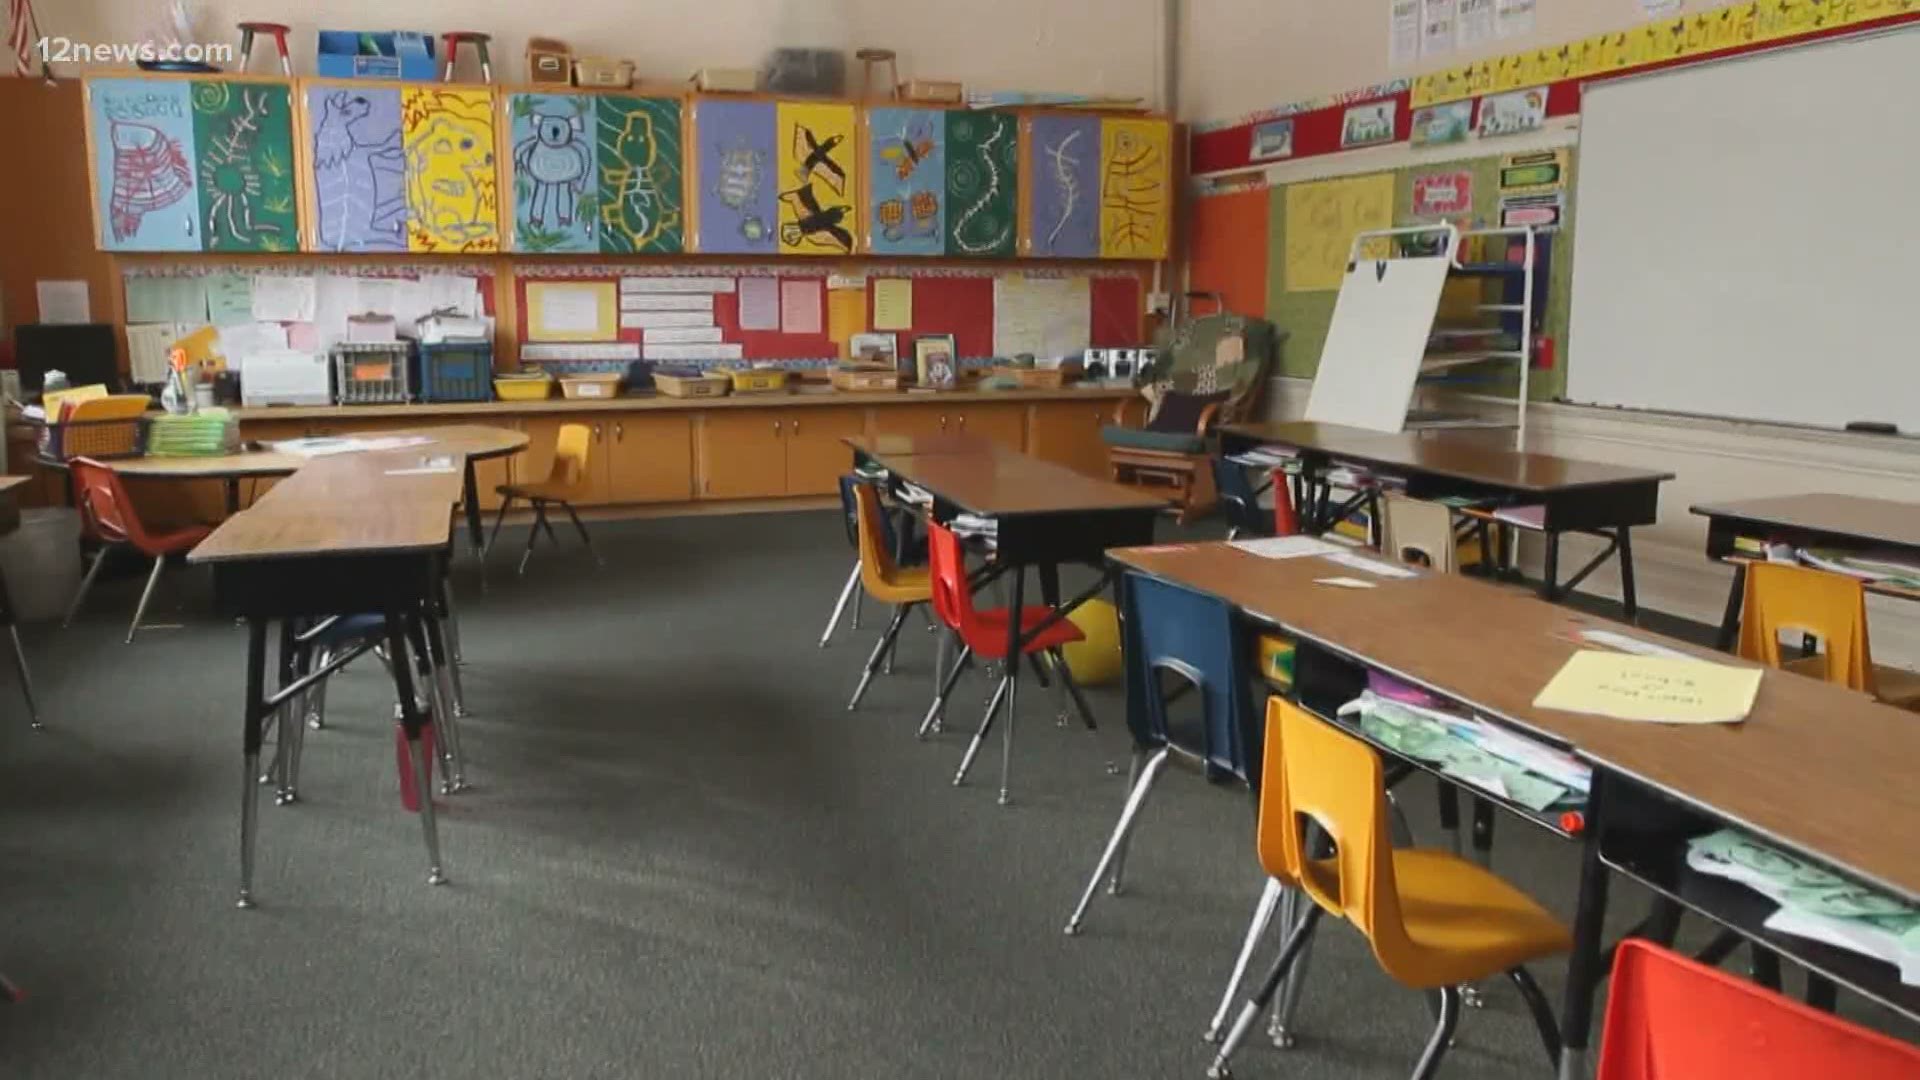 Guidelines on how and when schools in Arizona can reopen are expected Friday. Maricopa County health officials say schools are not meeting benchmarks for reopening.